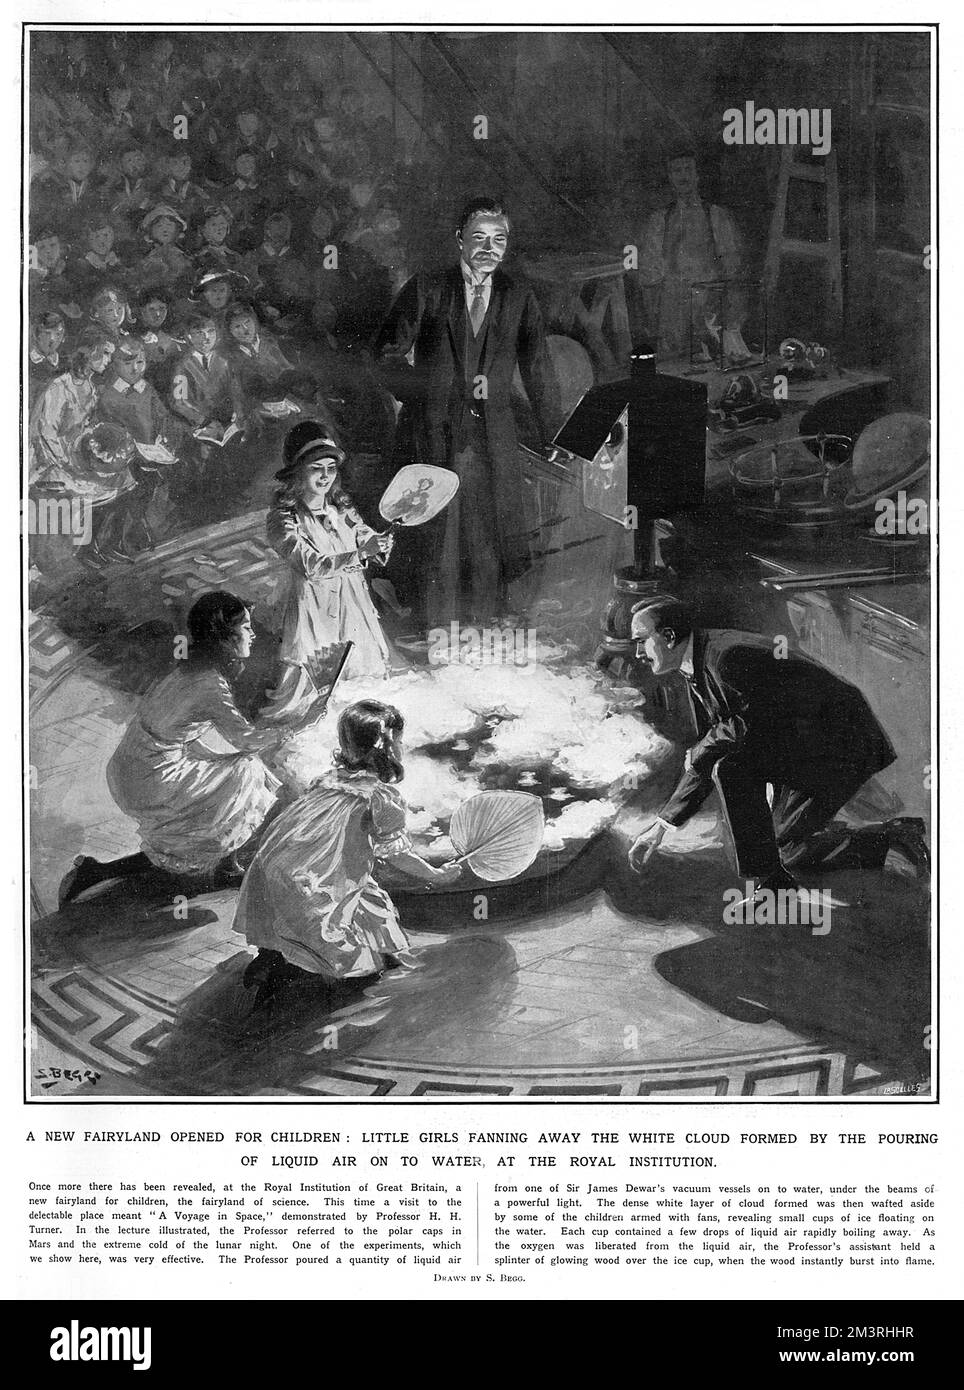 Royal Institution Christmas Lecture. A new fairyland opened for children: little girls fanning away the white cloud formed by the pouring of liquid air on to water, at the Royal Institution, demonstrated by Professor Herbert Hall Turner.     Date: 1914 Stock Photo